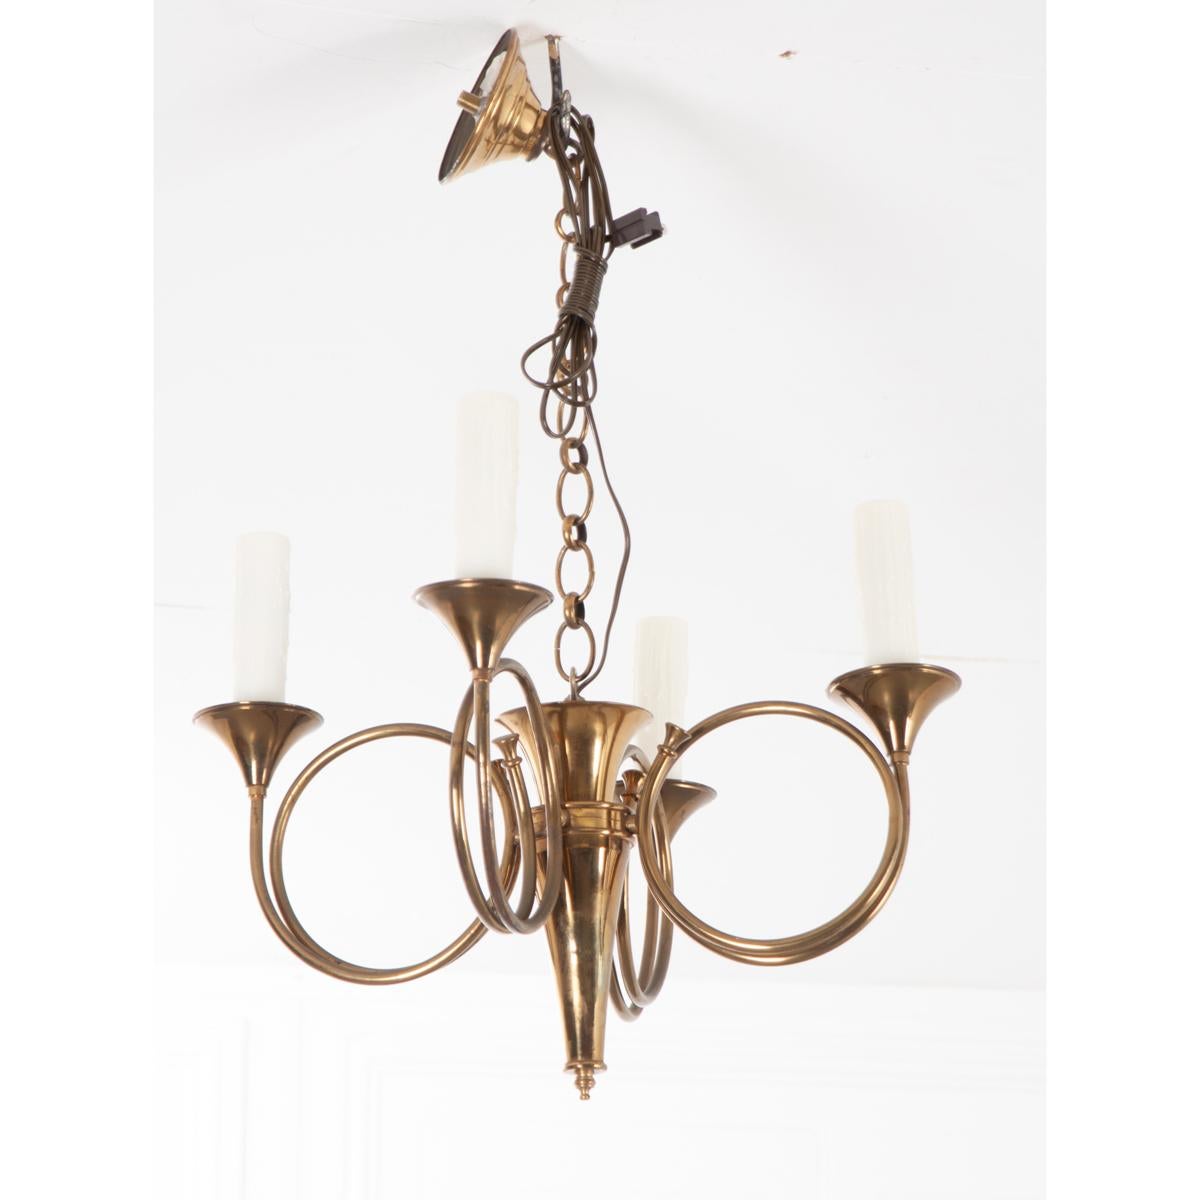 This is a fabulous brass finished, four-light chandelier. It mounts directly to the ceiling and extends down with a brass chain holding four horn-like candelabras. The faux candle fixtures are larger than normal and are quite nice. This simple yet